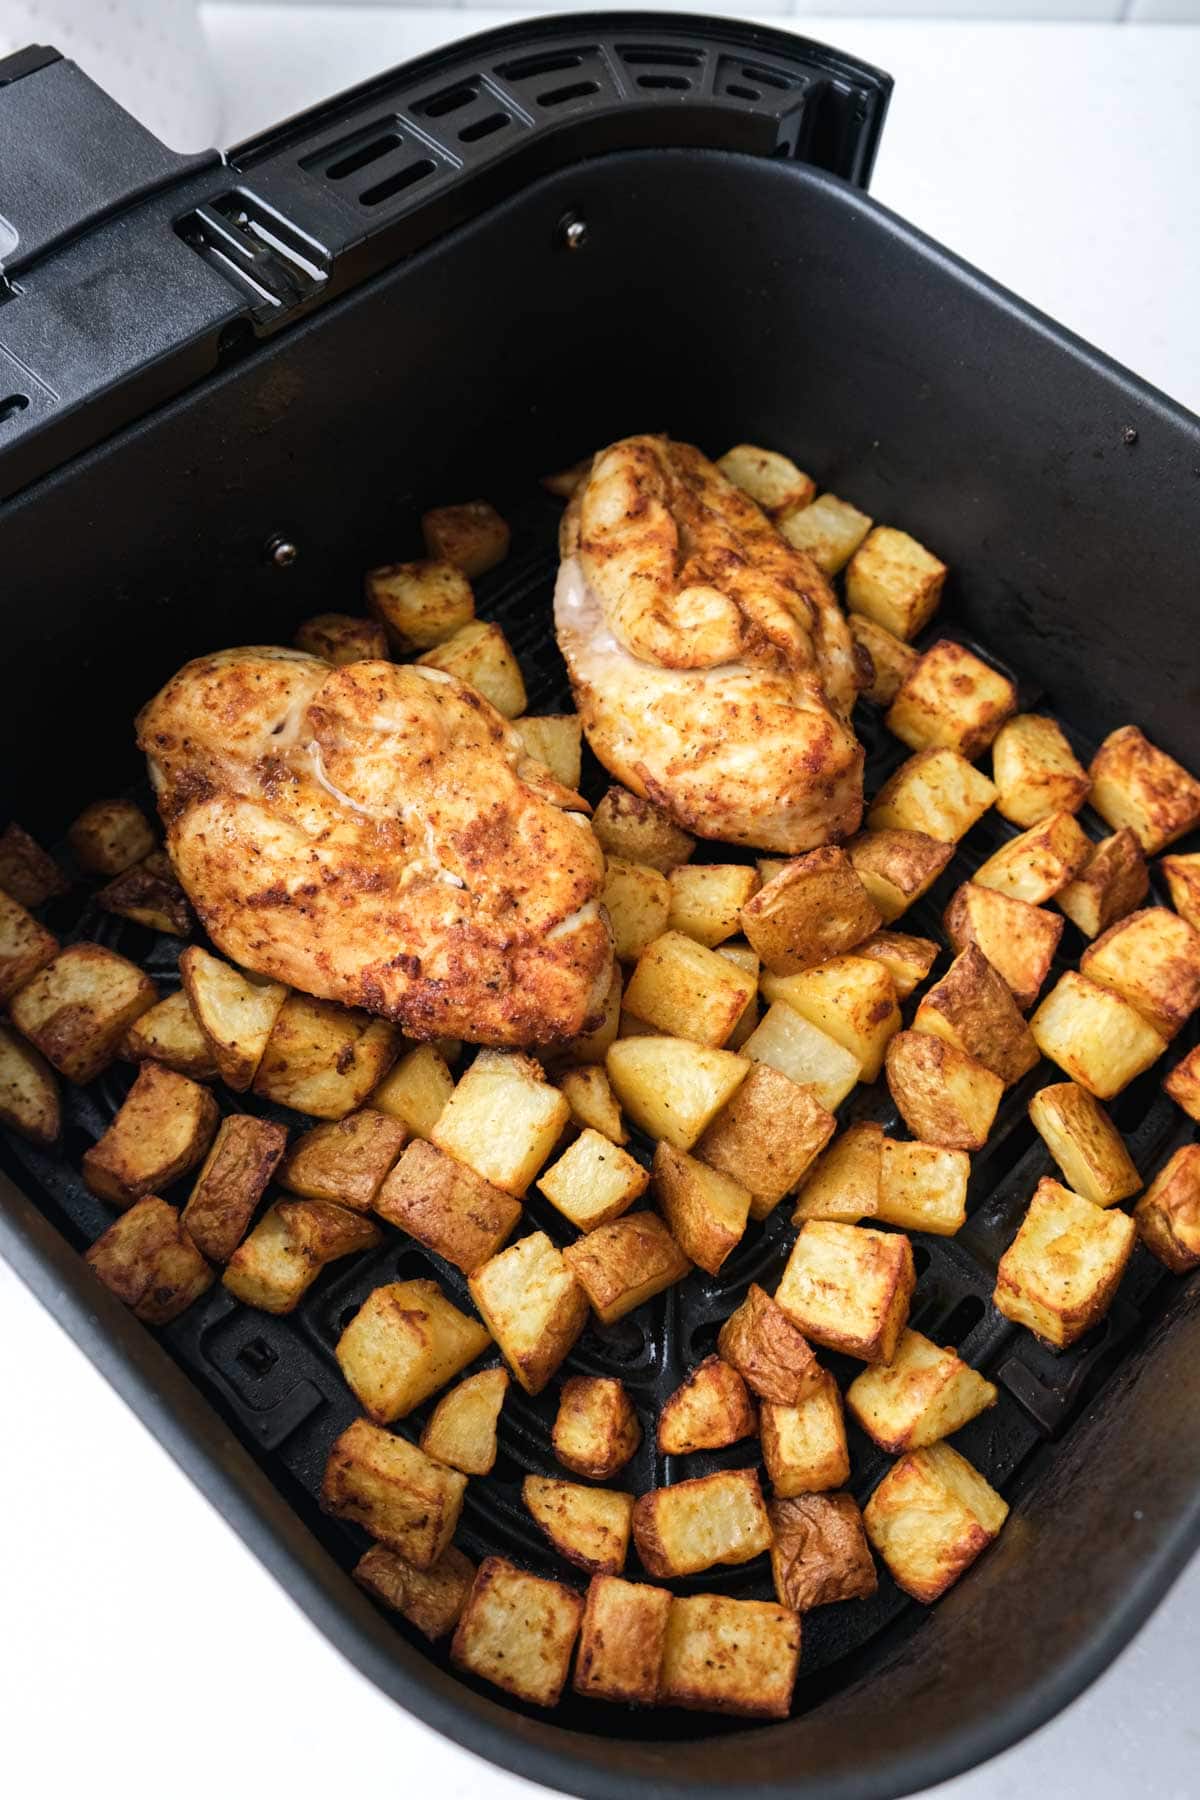 cooked chicken breast sitting on bed of cooked potatoes in black air fryer tray on white counter.